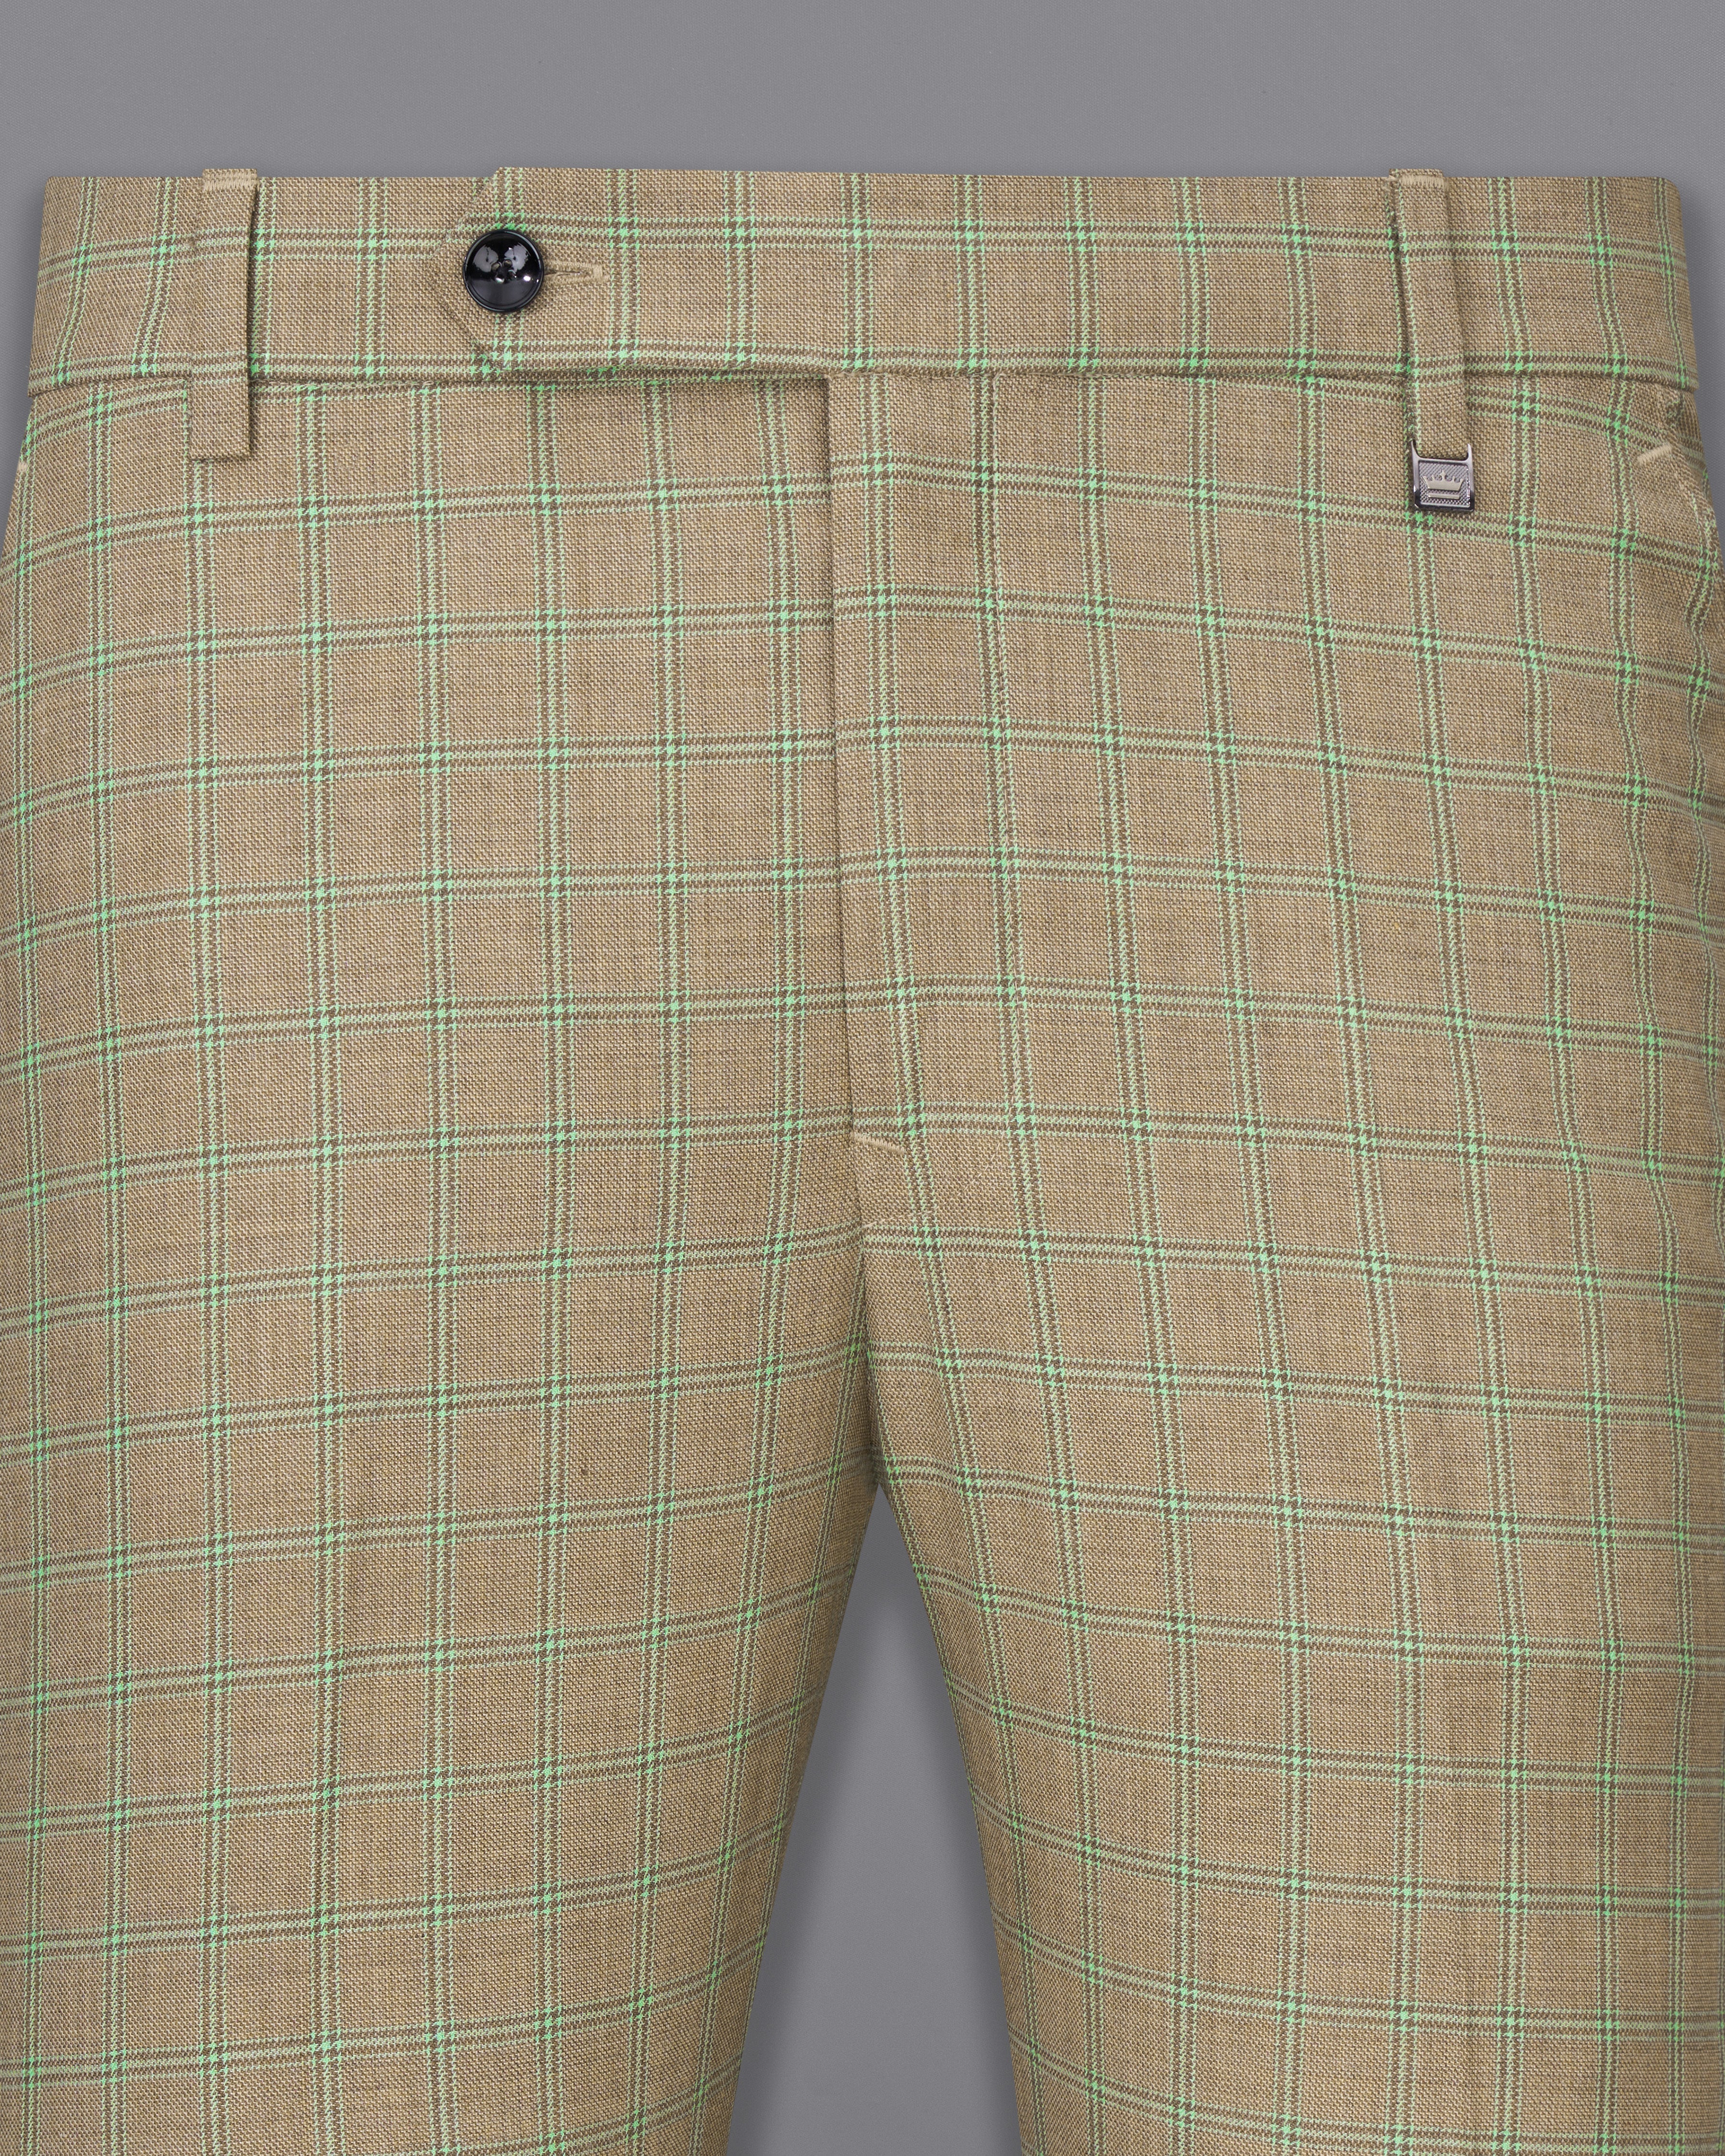 Sandrift Brown with Sprout Green Plaid Bandhgala Suit ST2483-BG-36, ST2483-BG-38, ST2483-BG-40, ST2483-BG-42, ST2483-BG-44, ST2483-BG-46, ST2483-BG-48, ST2483-BG-50, ST2483-BG-52, ST2483-BG-54, ST2483-BG-56, ST2483-BG-58, ST2483-BG-60